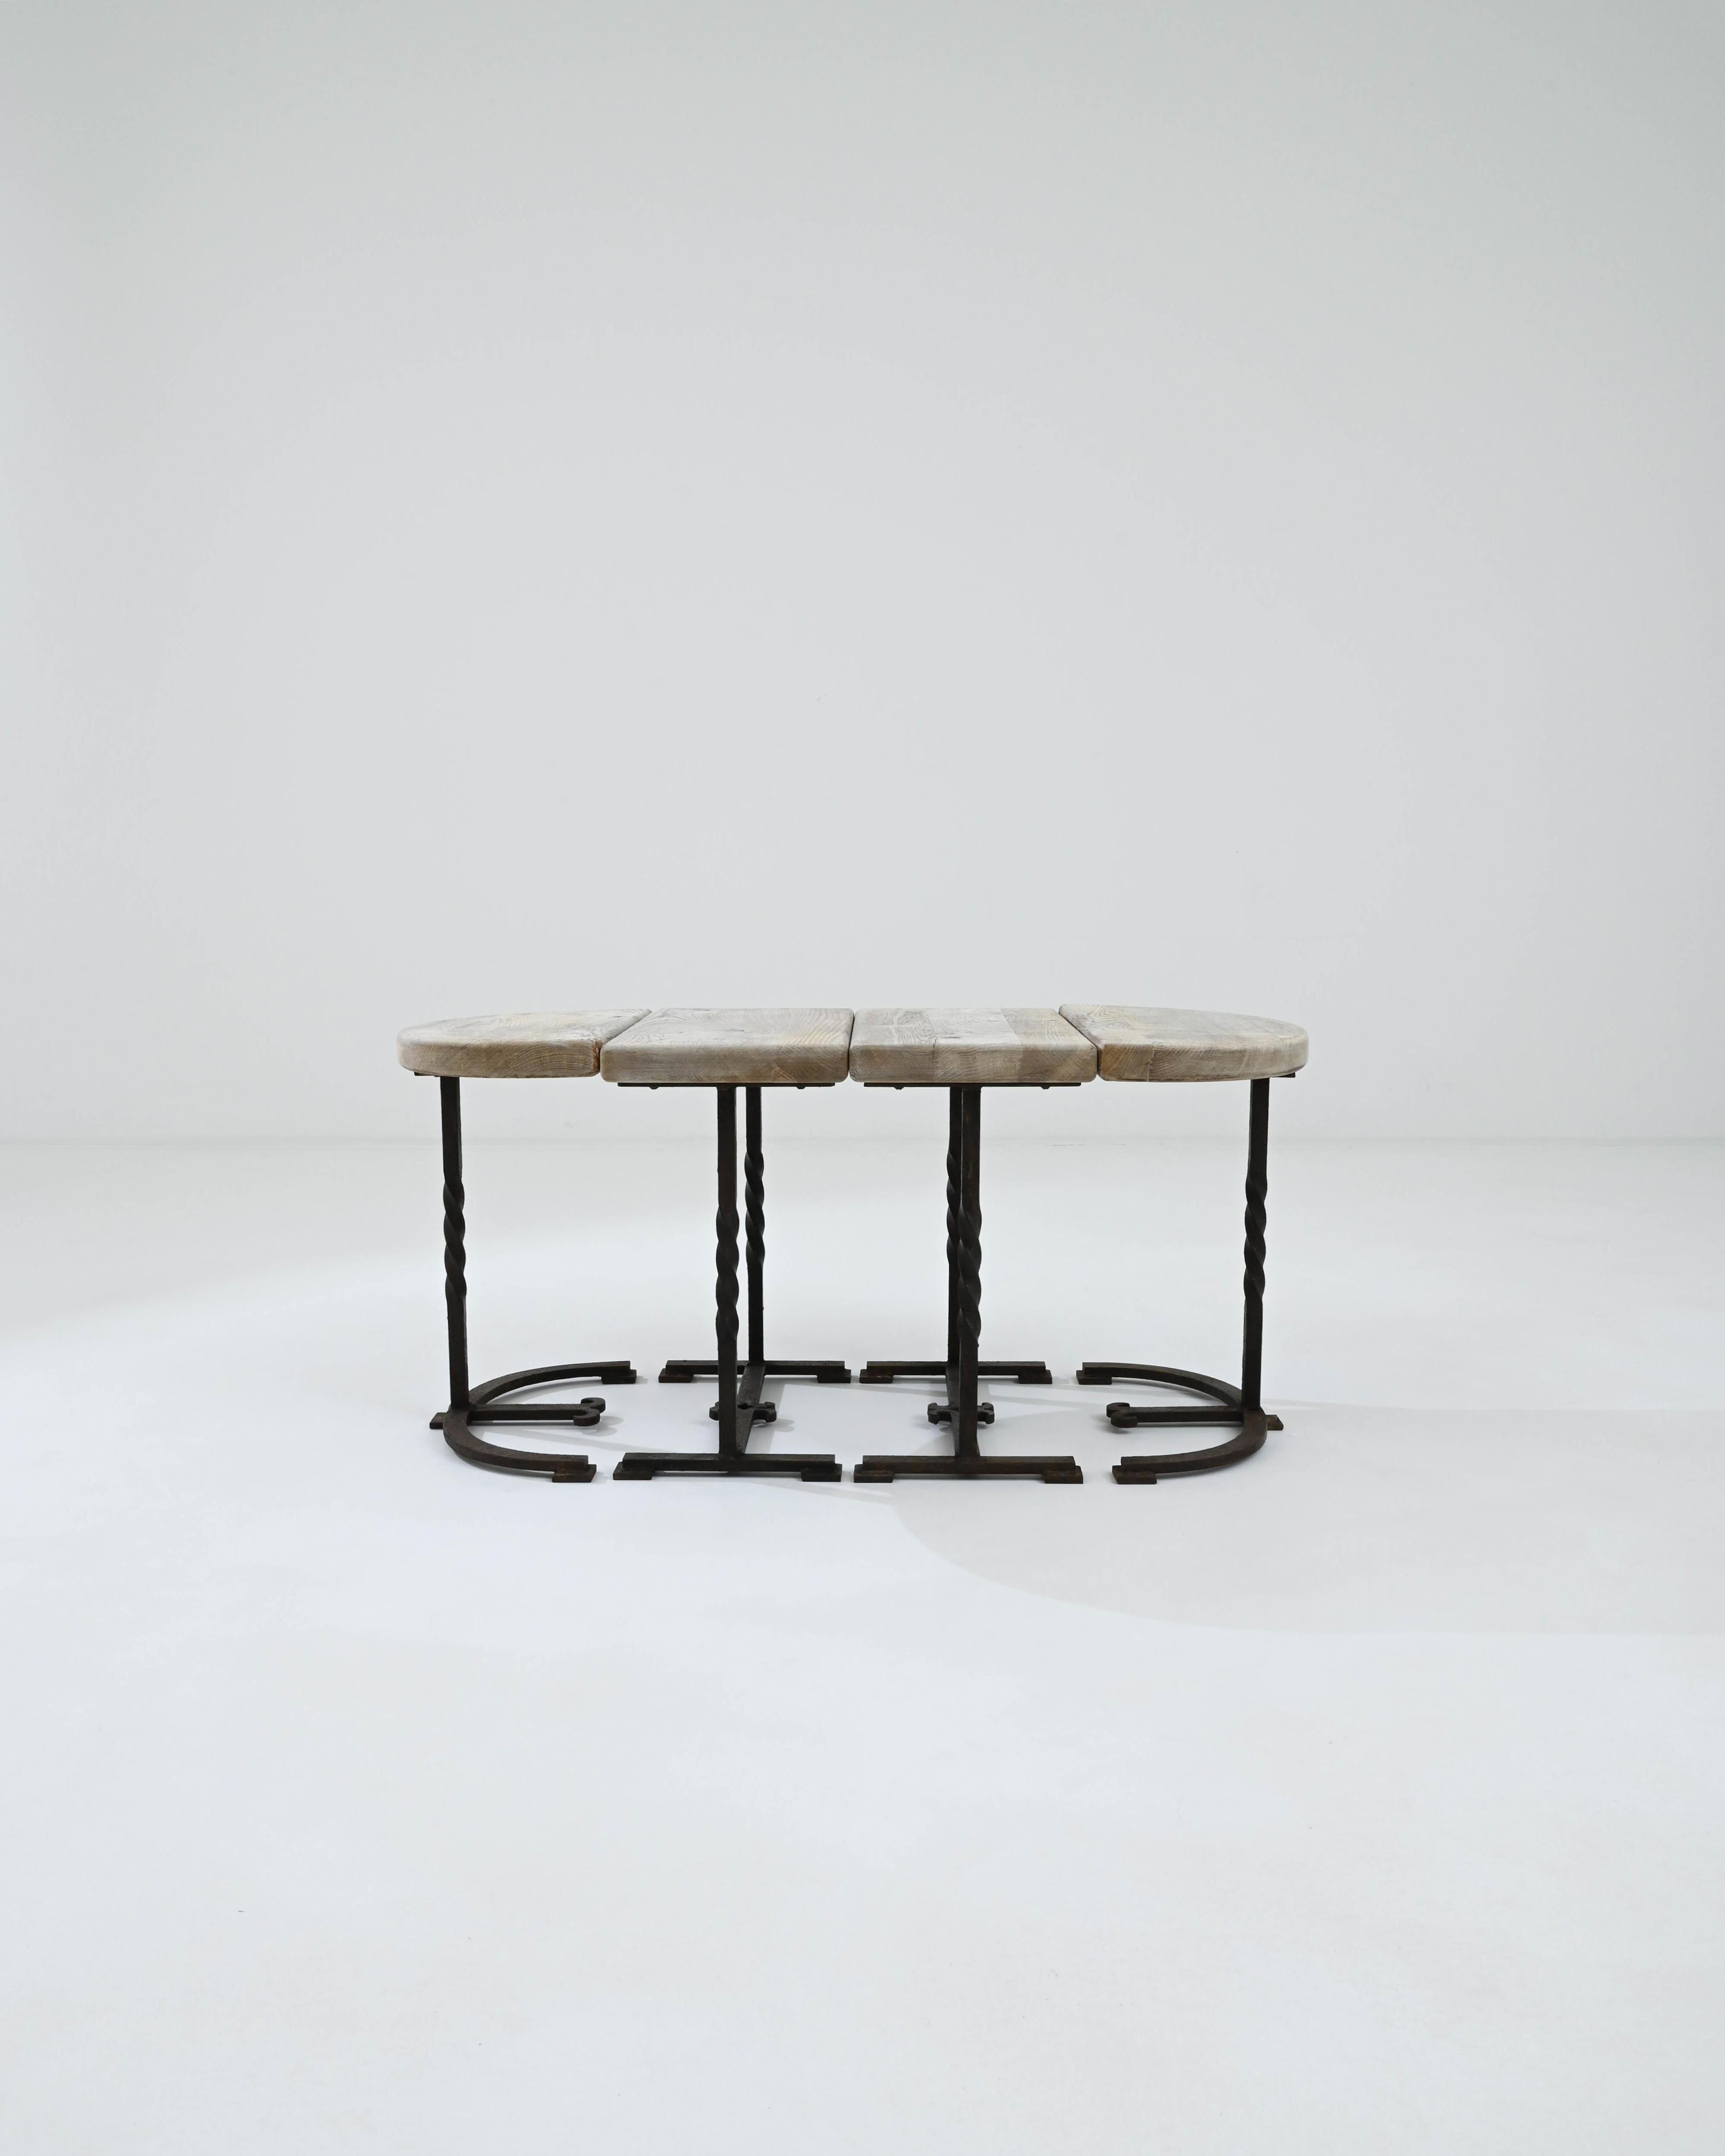 A set of four metal and wooden tables created in 20th century Belgium. Modular, expertly composed, and created from thoughtful materials, this set of small tables charms the eye. Twisted wrought iron and thick slabs of lumber make up four individual